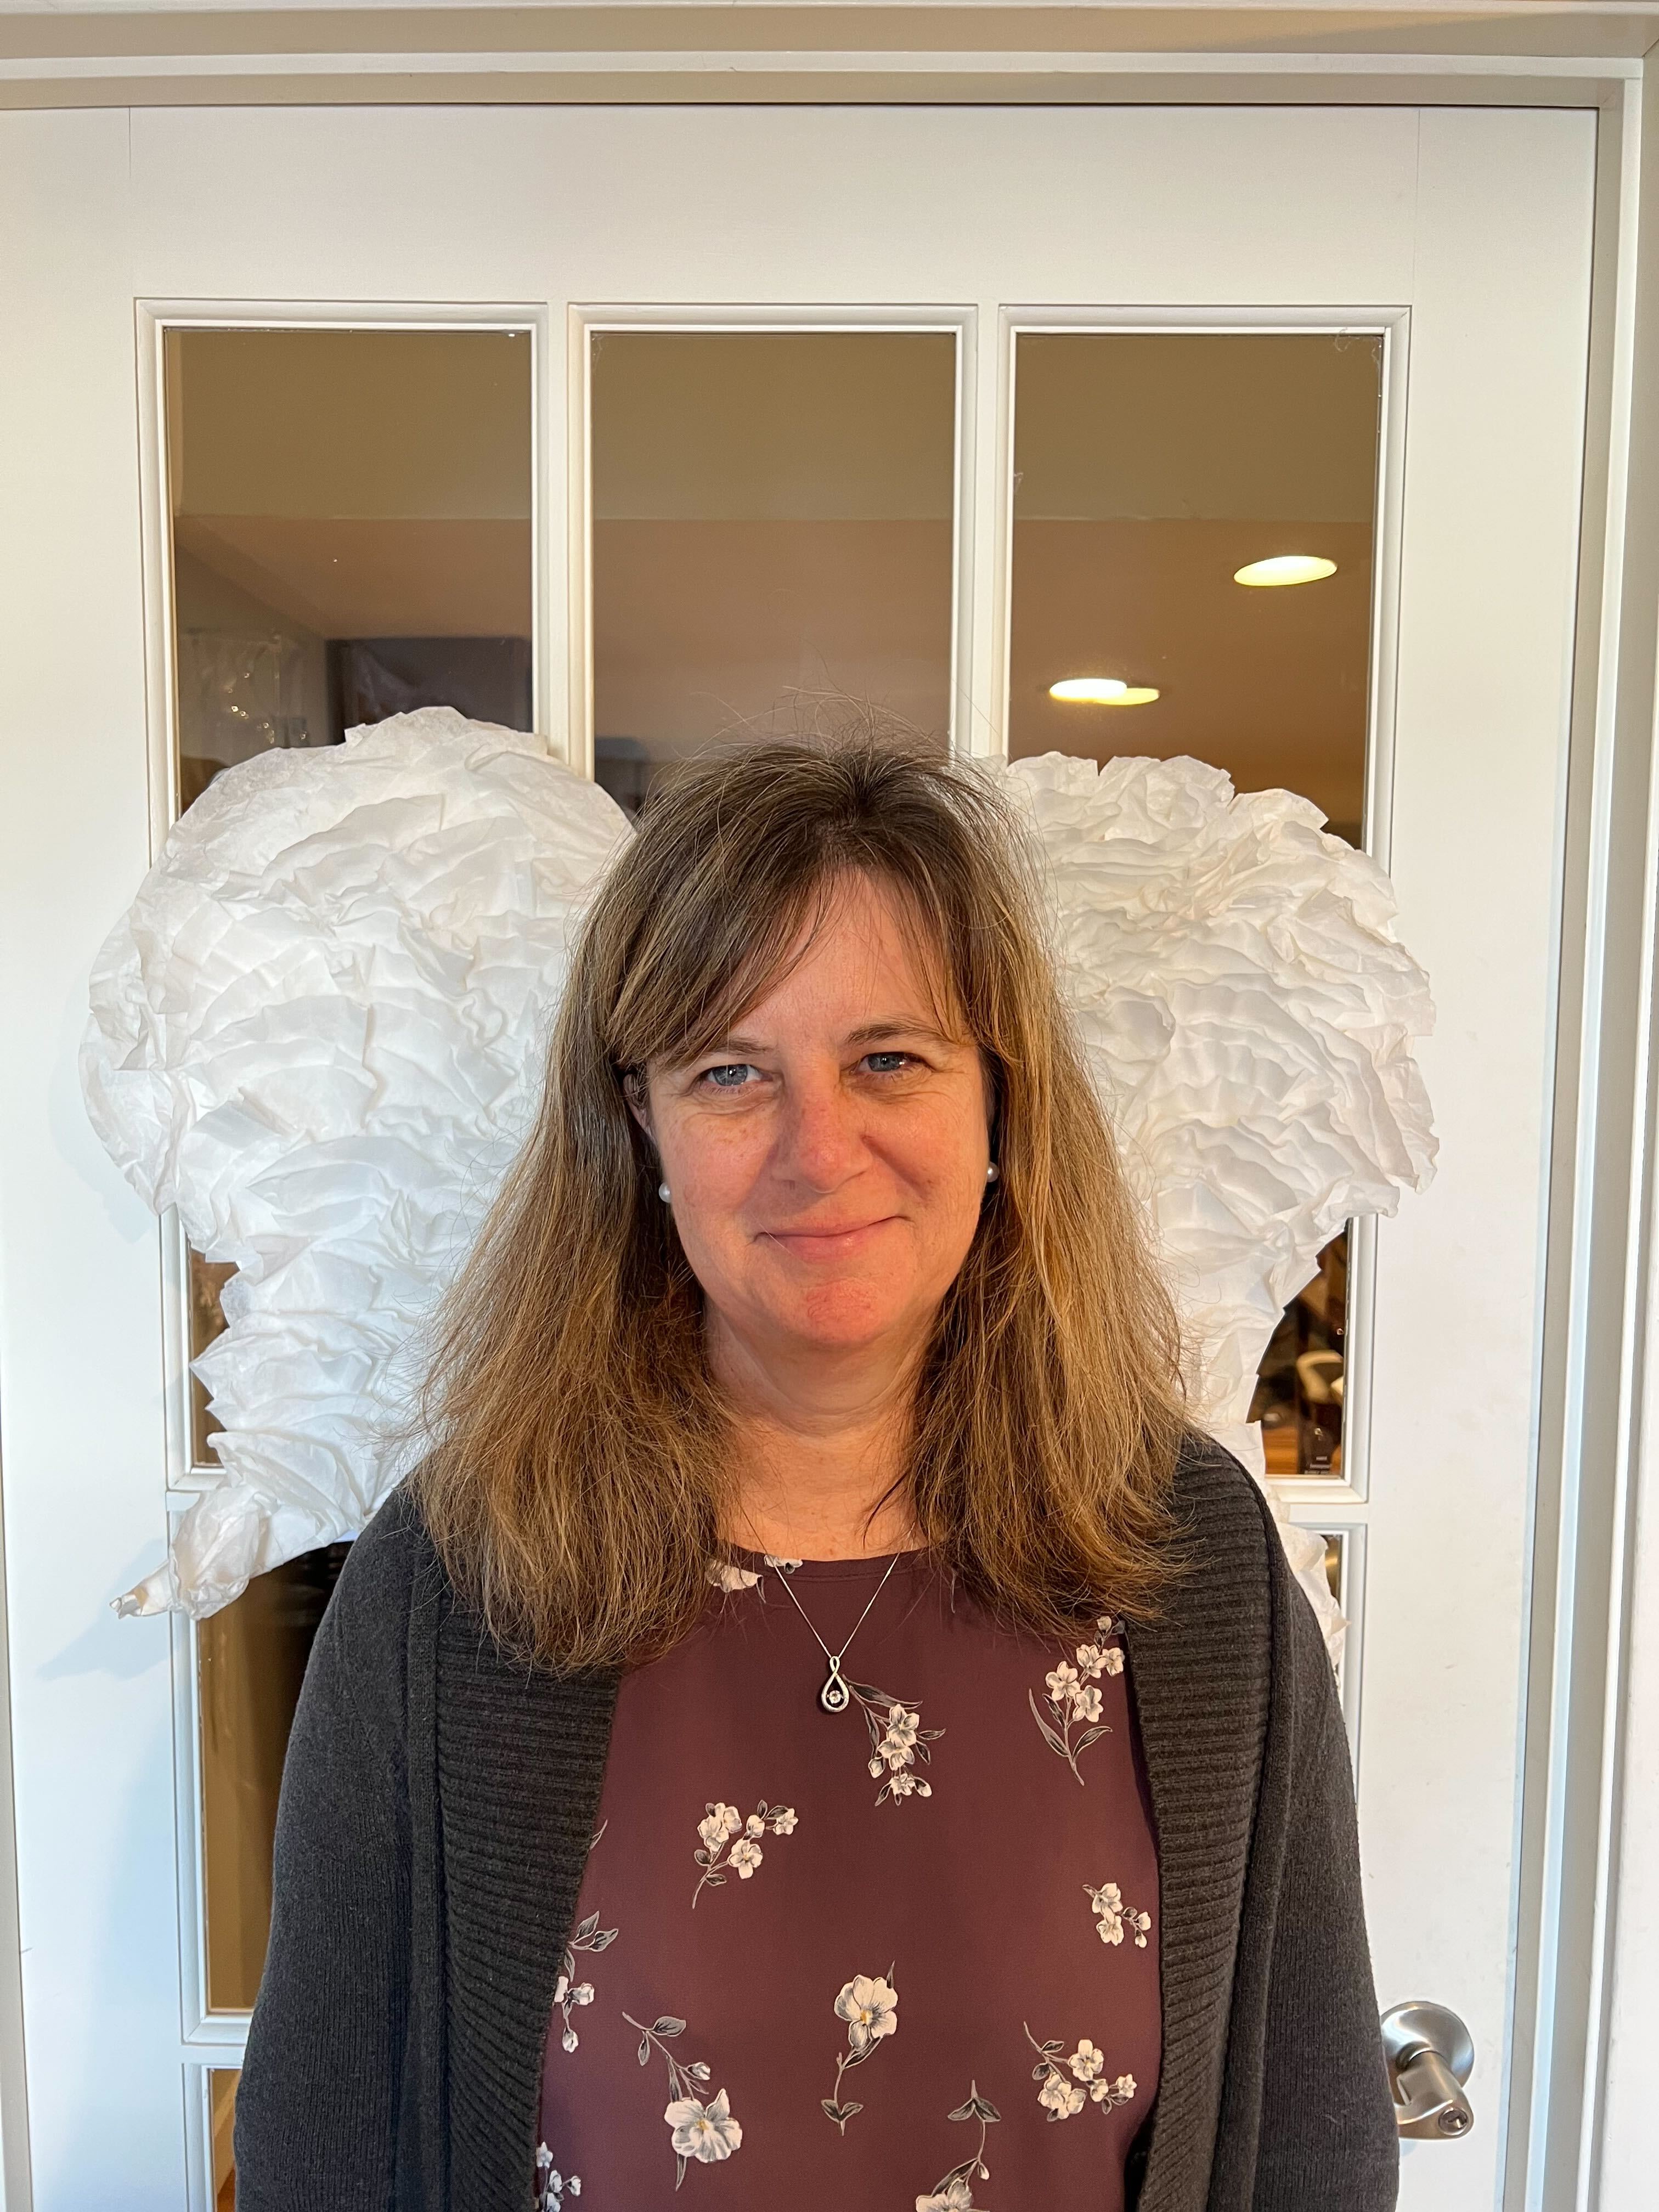 Carroll standing in front of angel wings